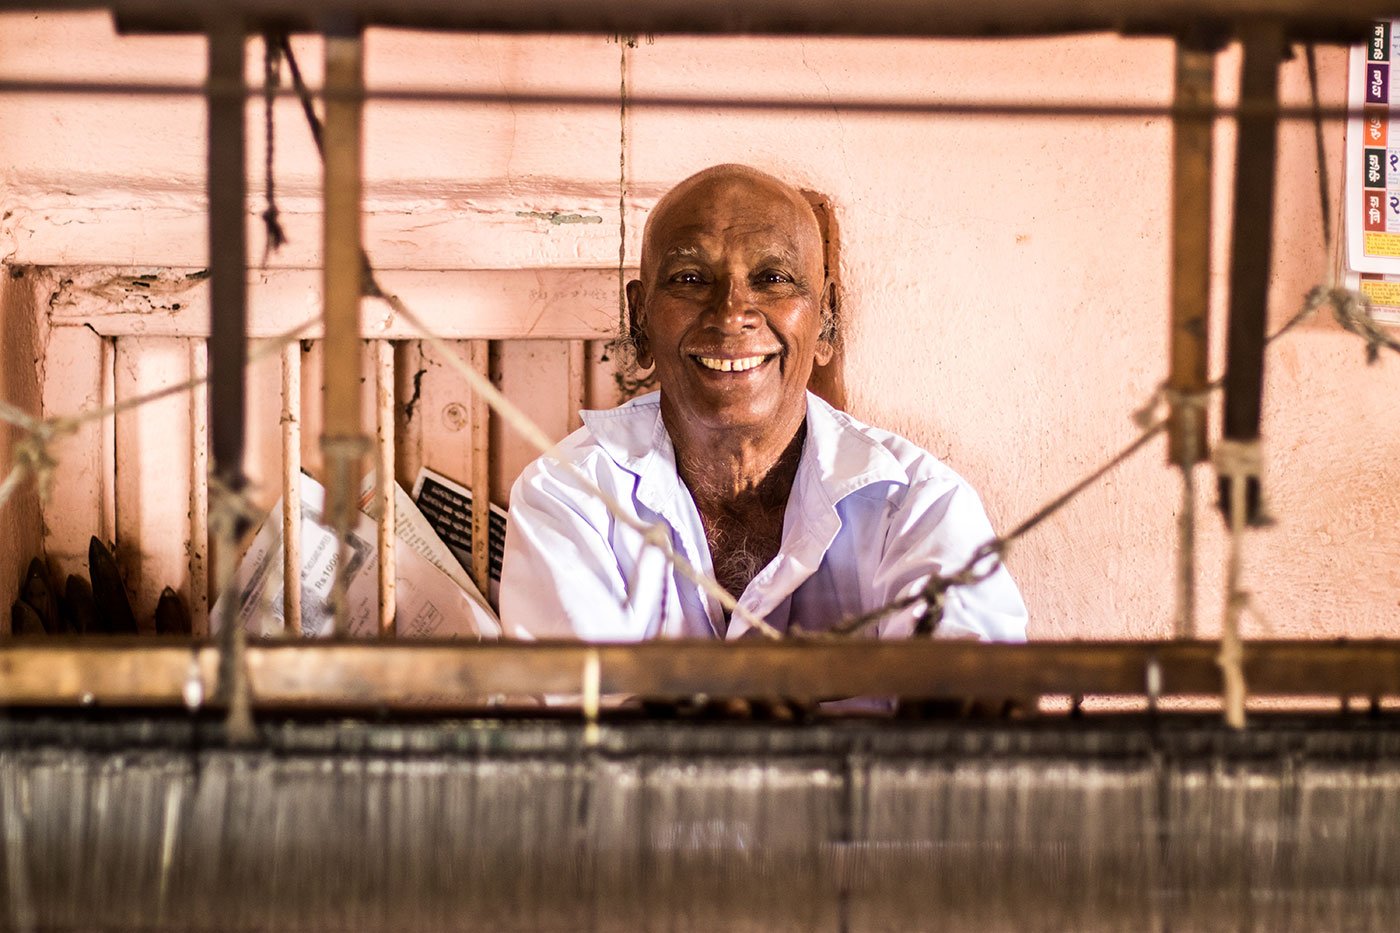 Vasant Tambe is the among the last four handloom weavers in the Rendal village alive